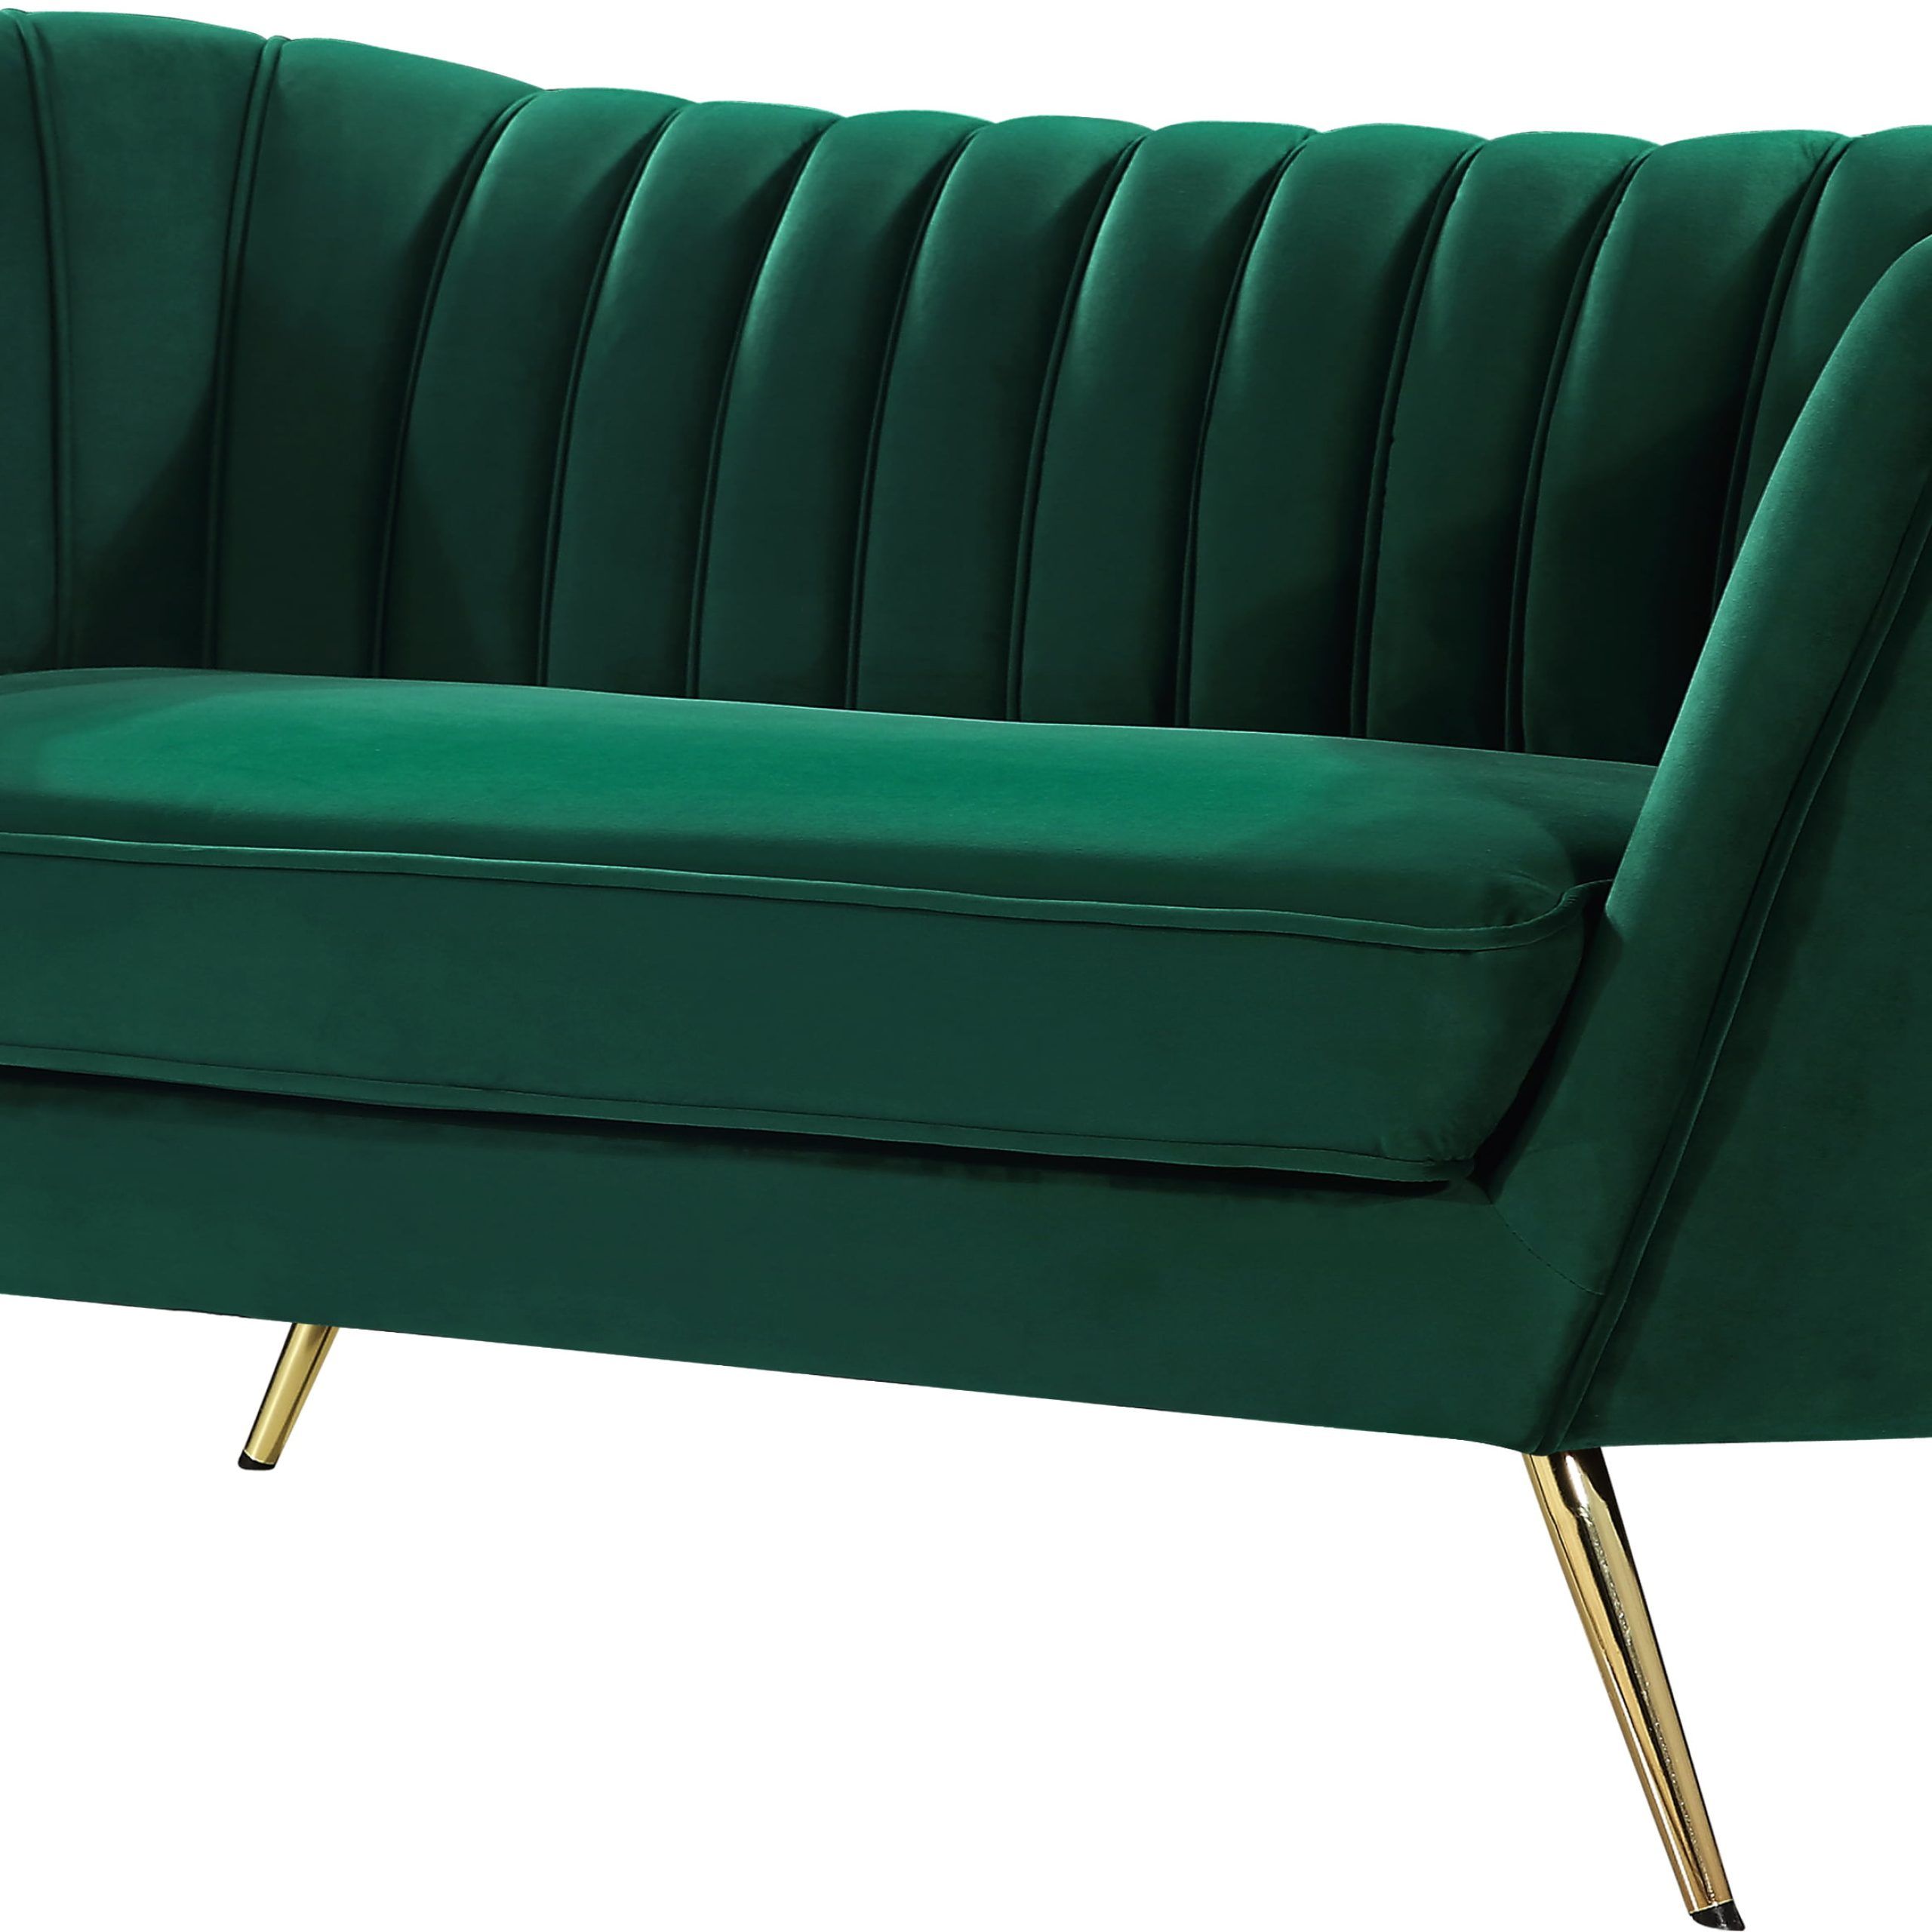 Small Love Seats In Velvet With Regard To Latest Margo Green Velvet Loveseat Color:green Velvet,style:contemporary (View 13 of 15)